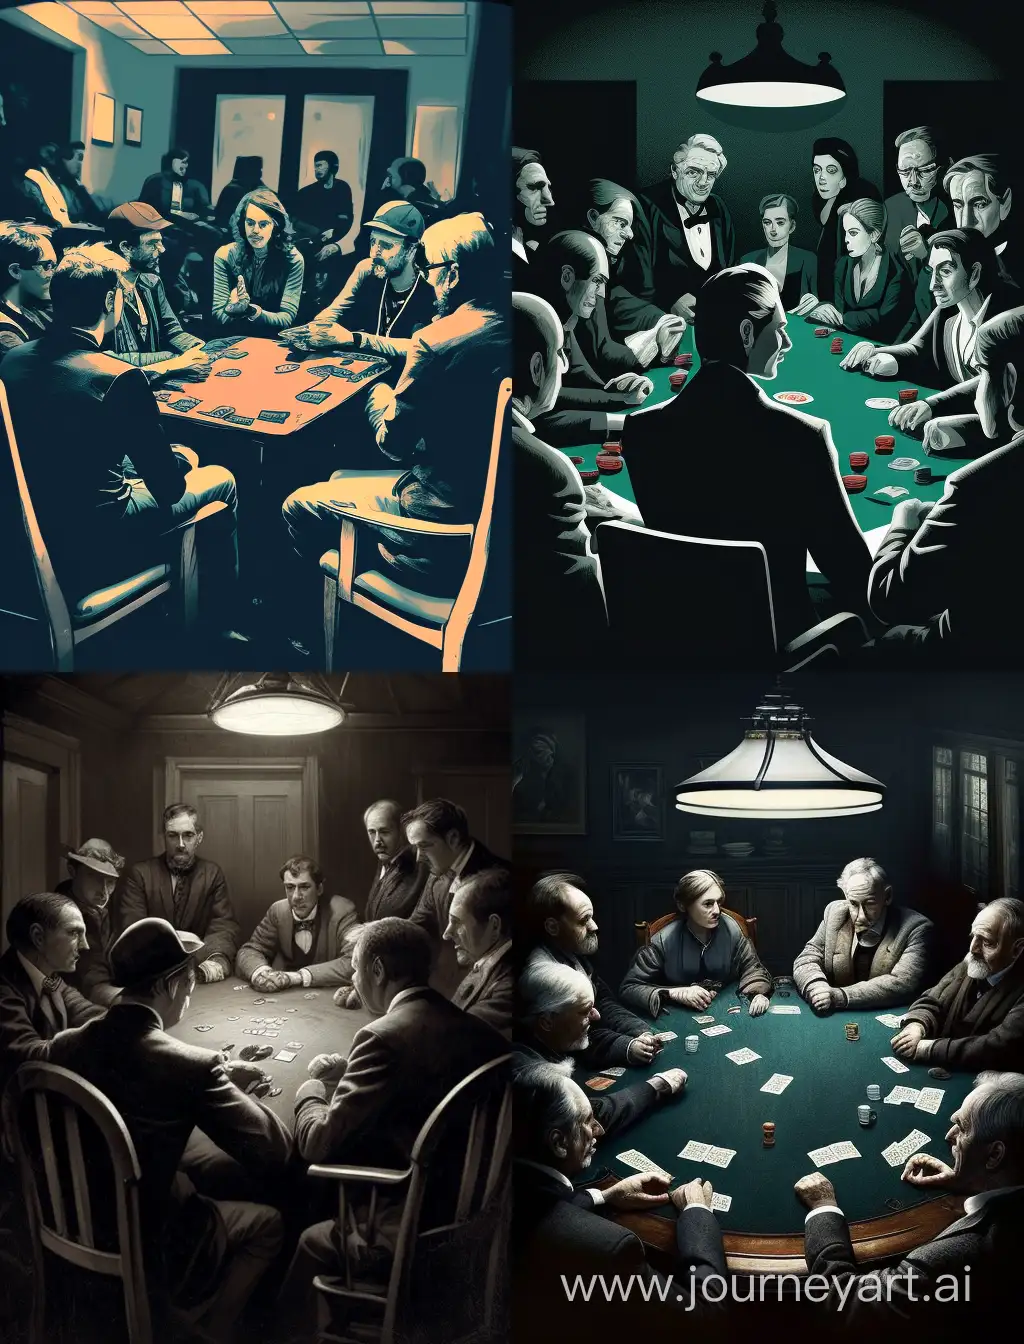 people playing poker in a card room with other players, with a hypnotist